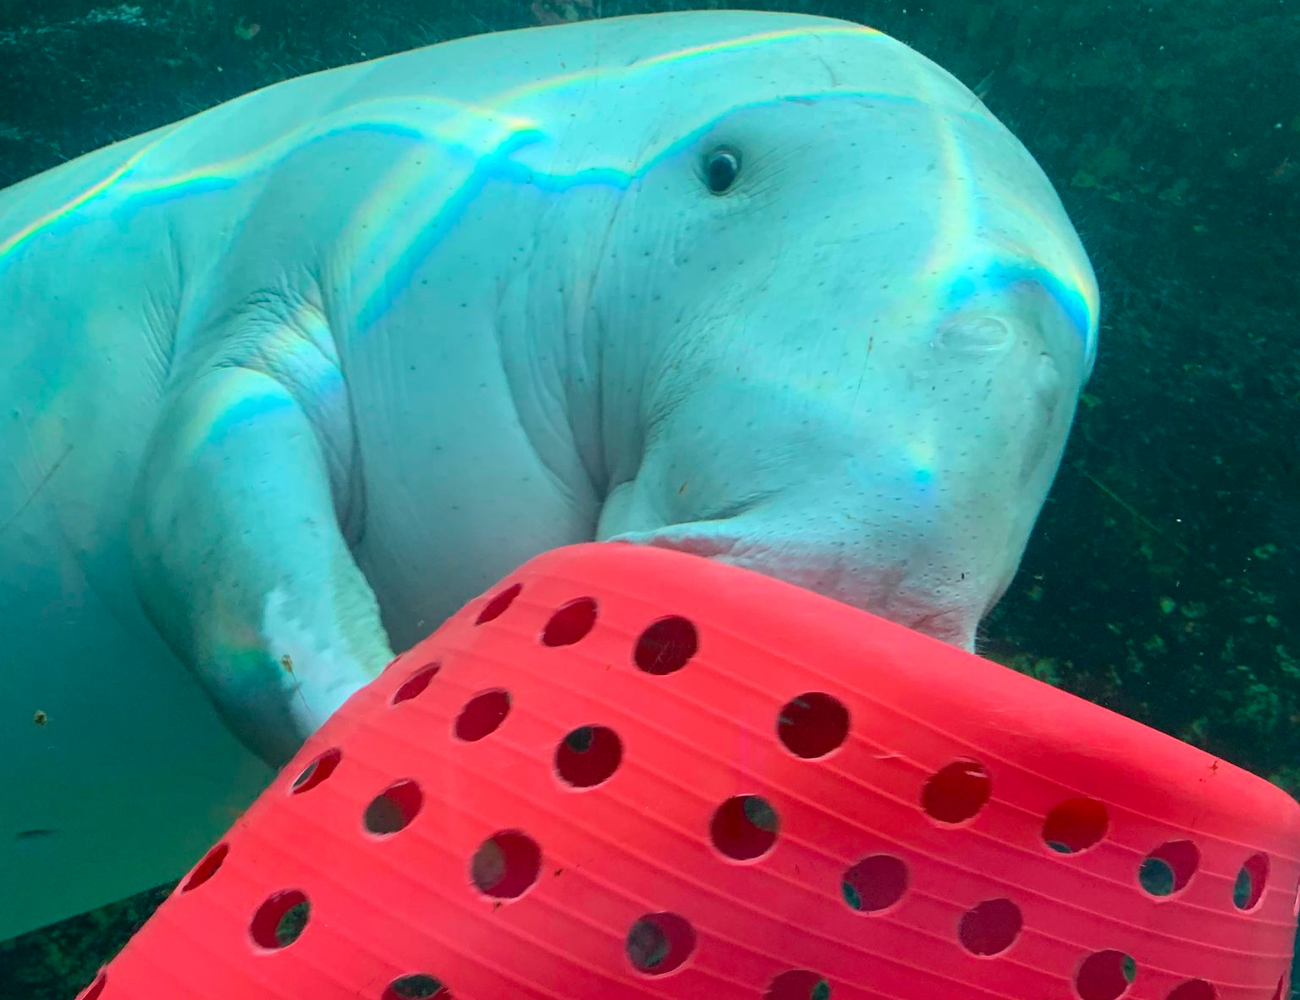 Meet our Resident Dugong | Sea Cow Facts | SEA LIFE Sydney